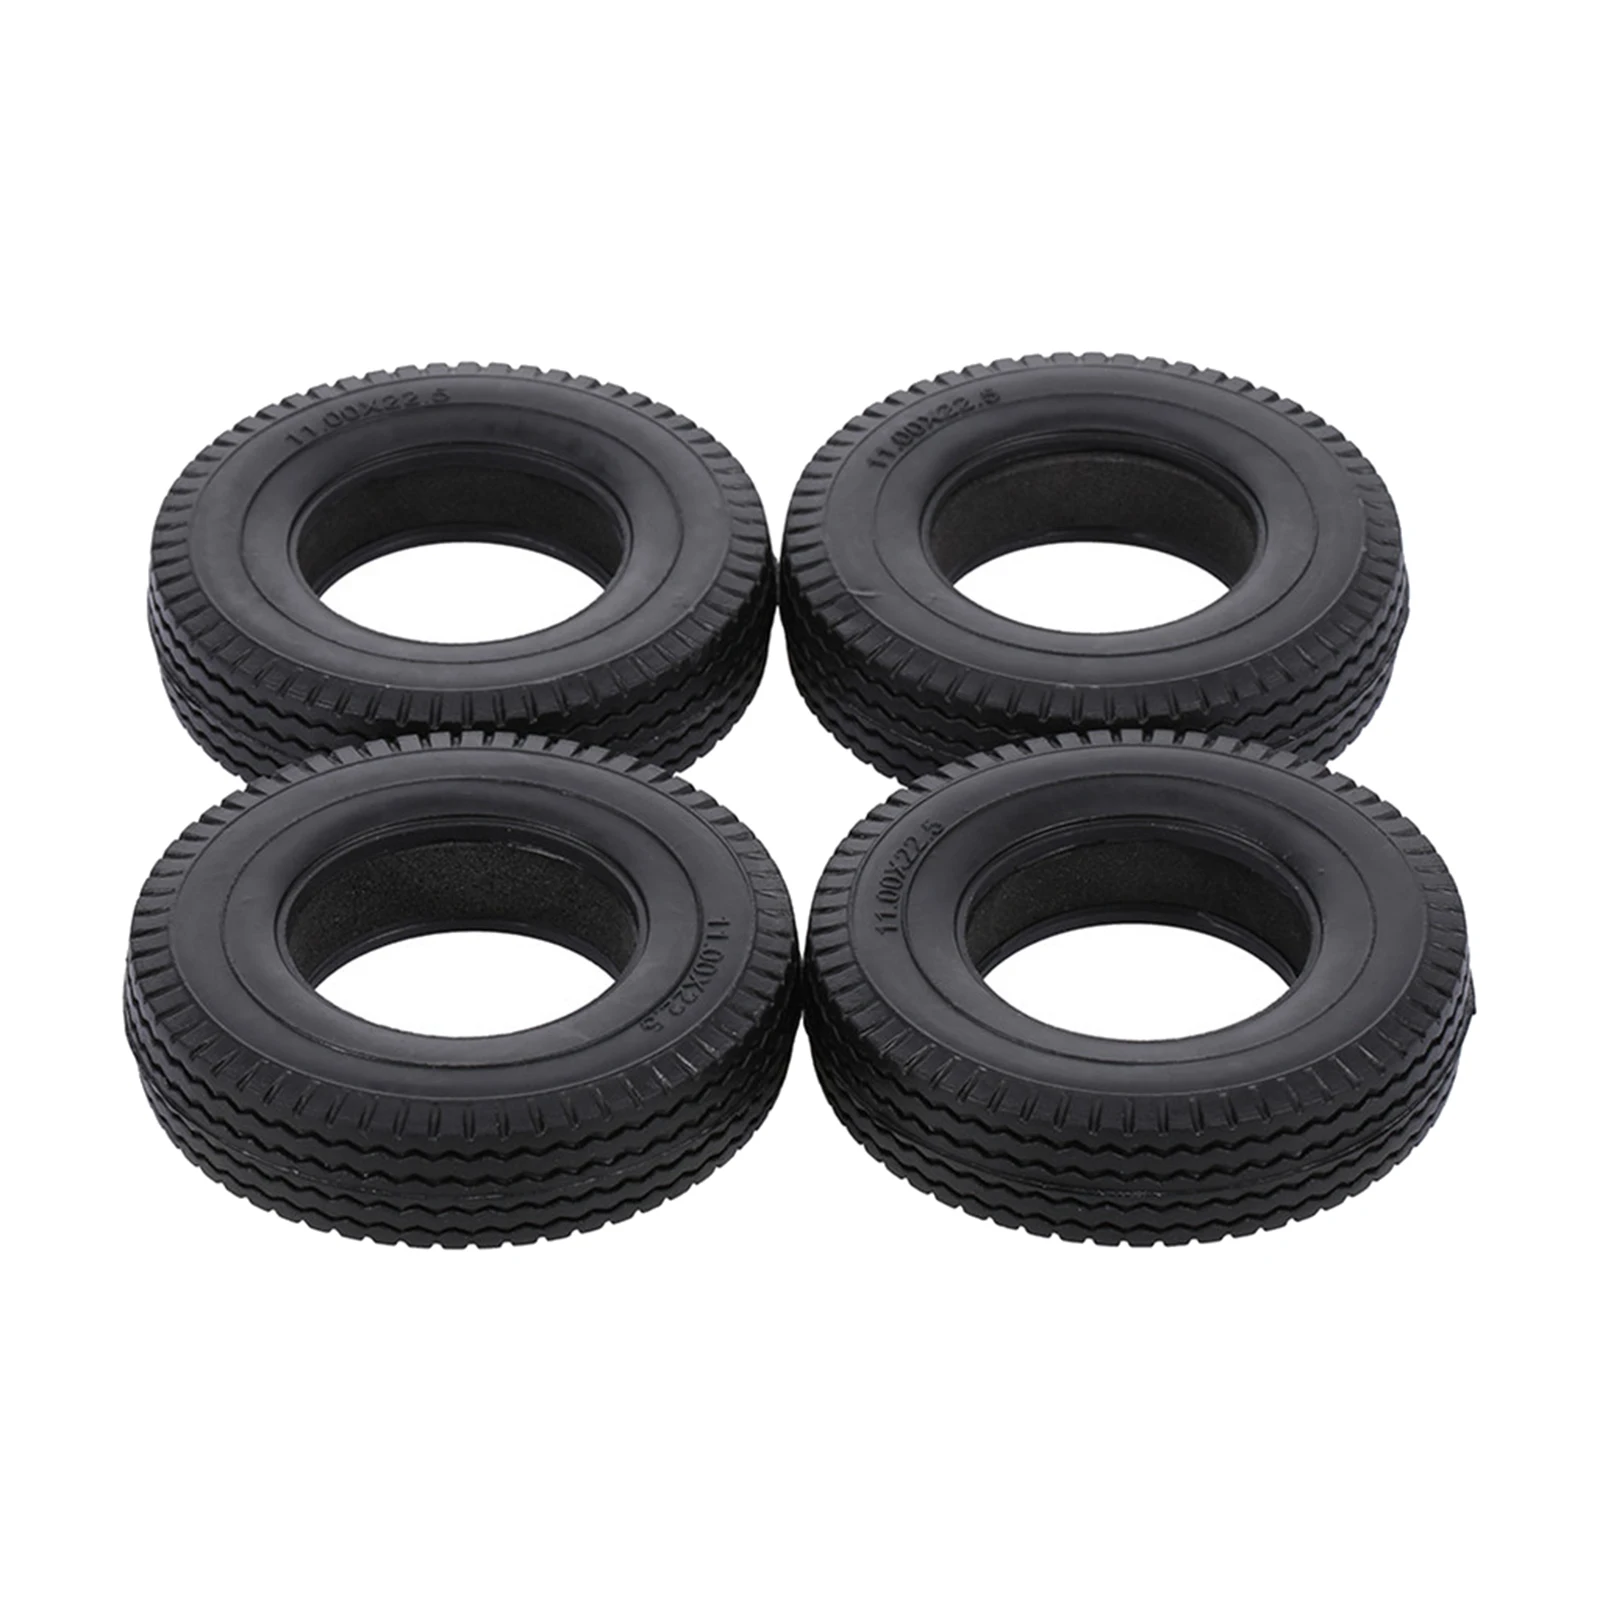 Hard Rubber Tires 20 mm TYPE 4pcs for Tamiya 1/14 Scale Tractor Camion RC Car Hot 